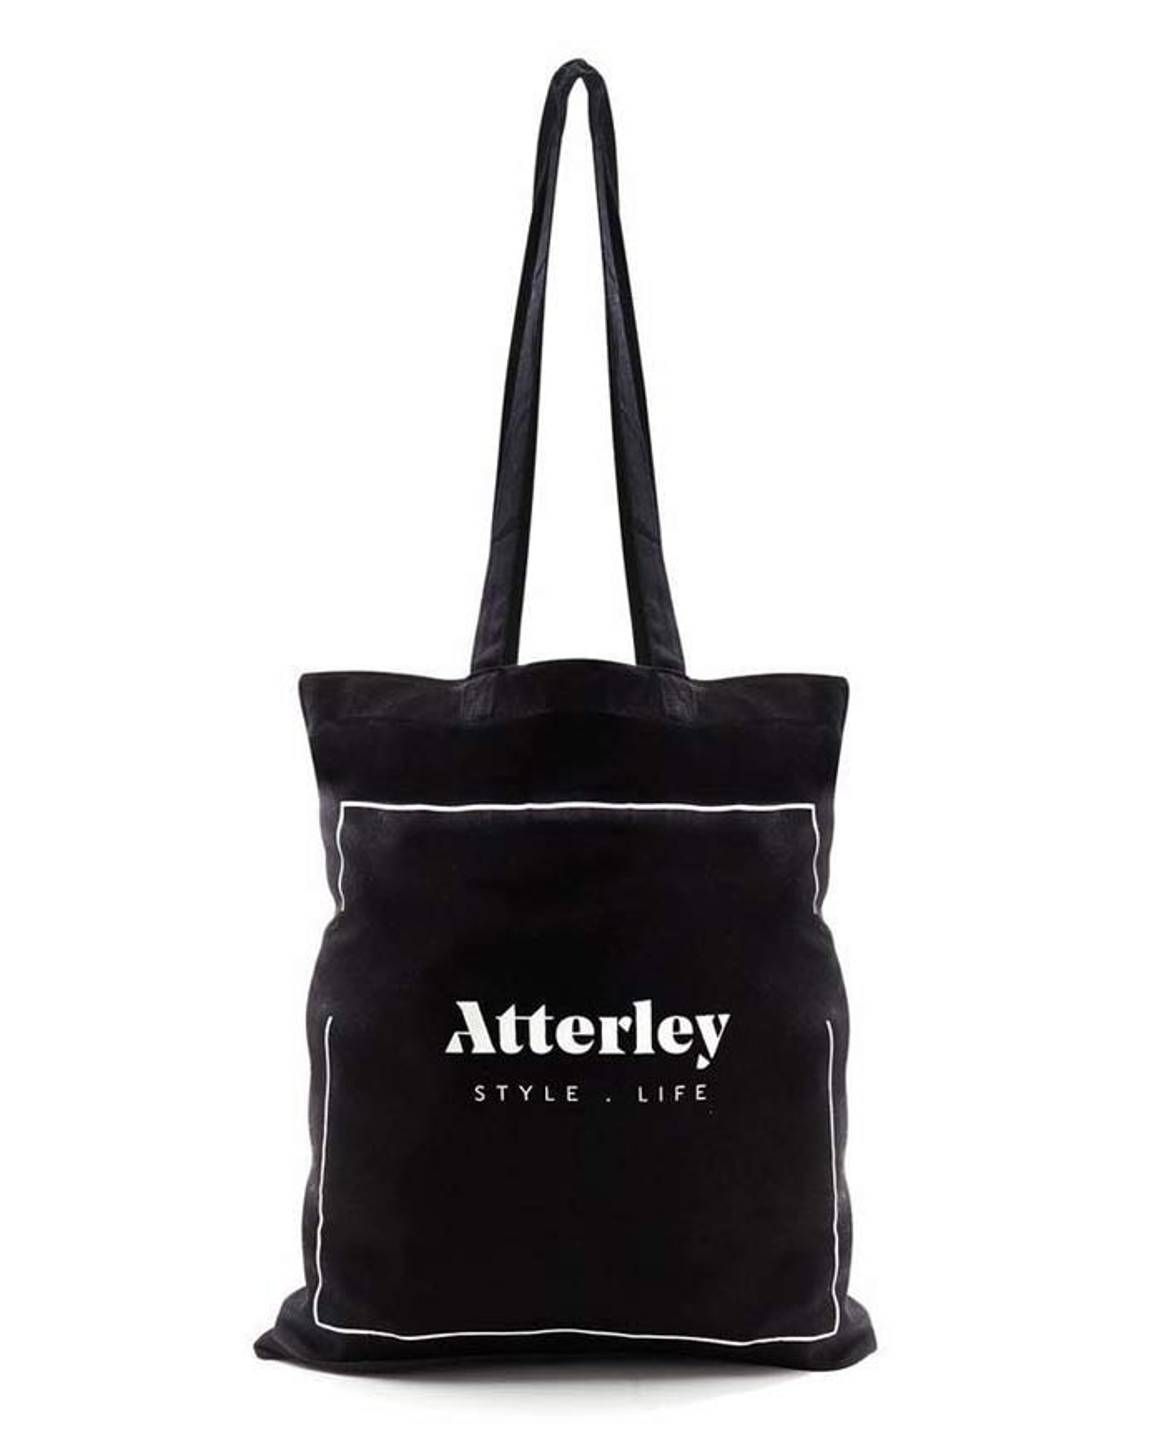 Atterley to make an online comeback